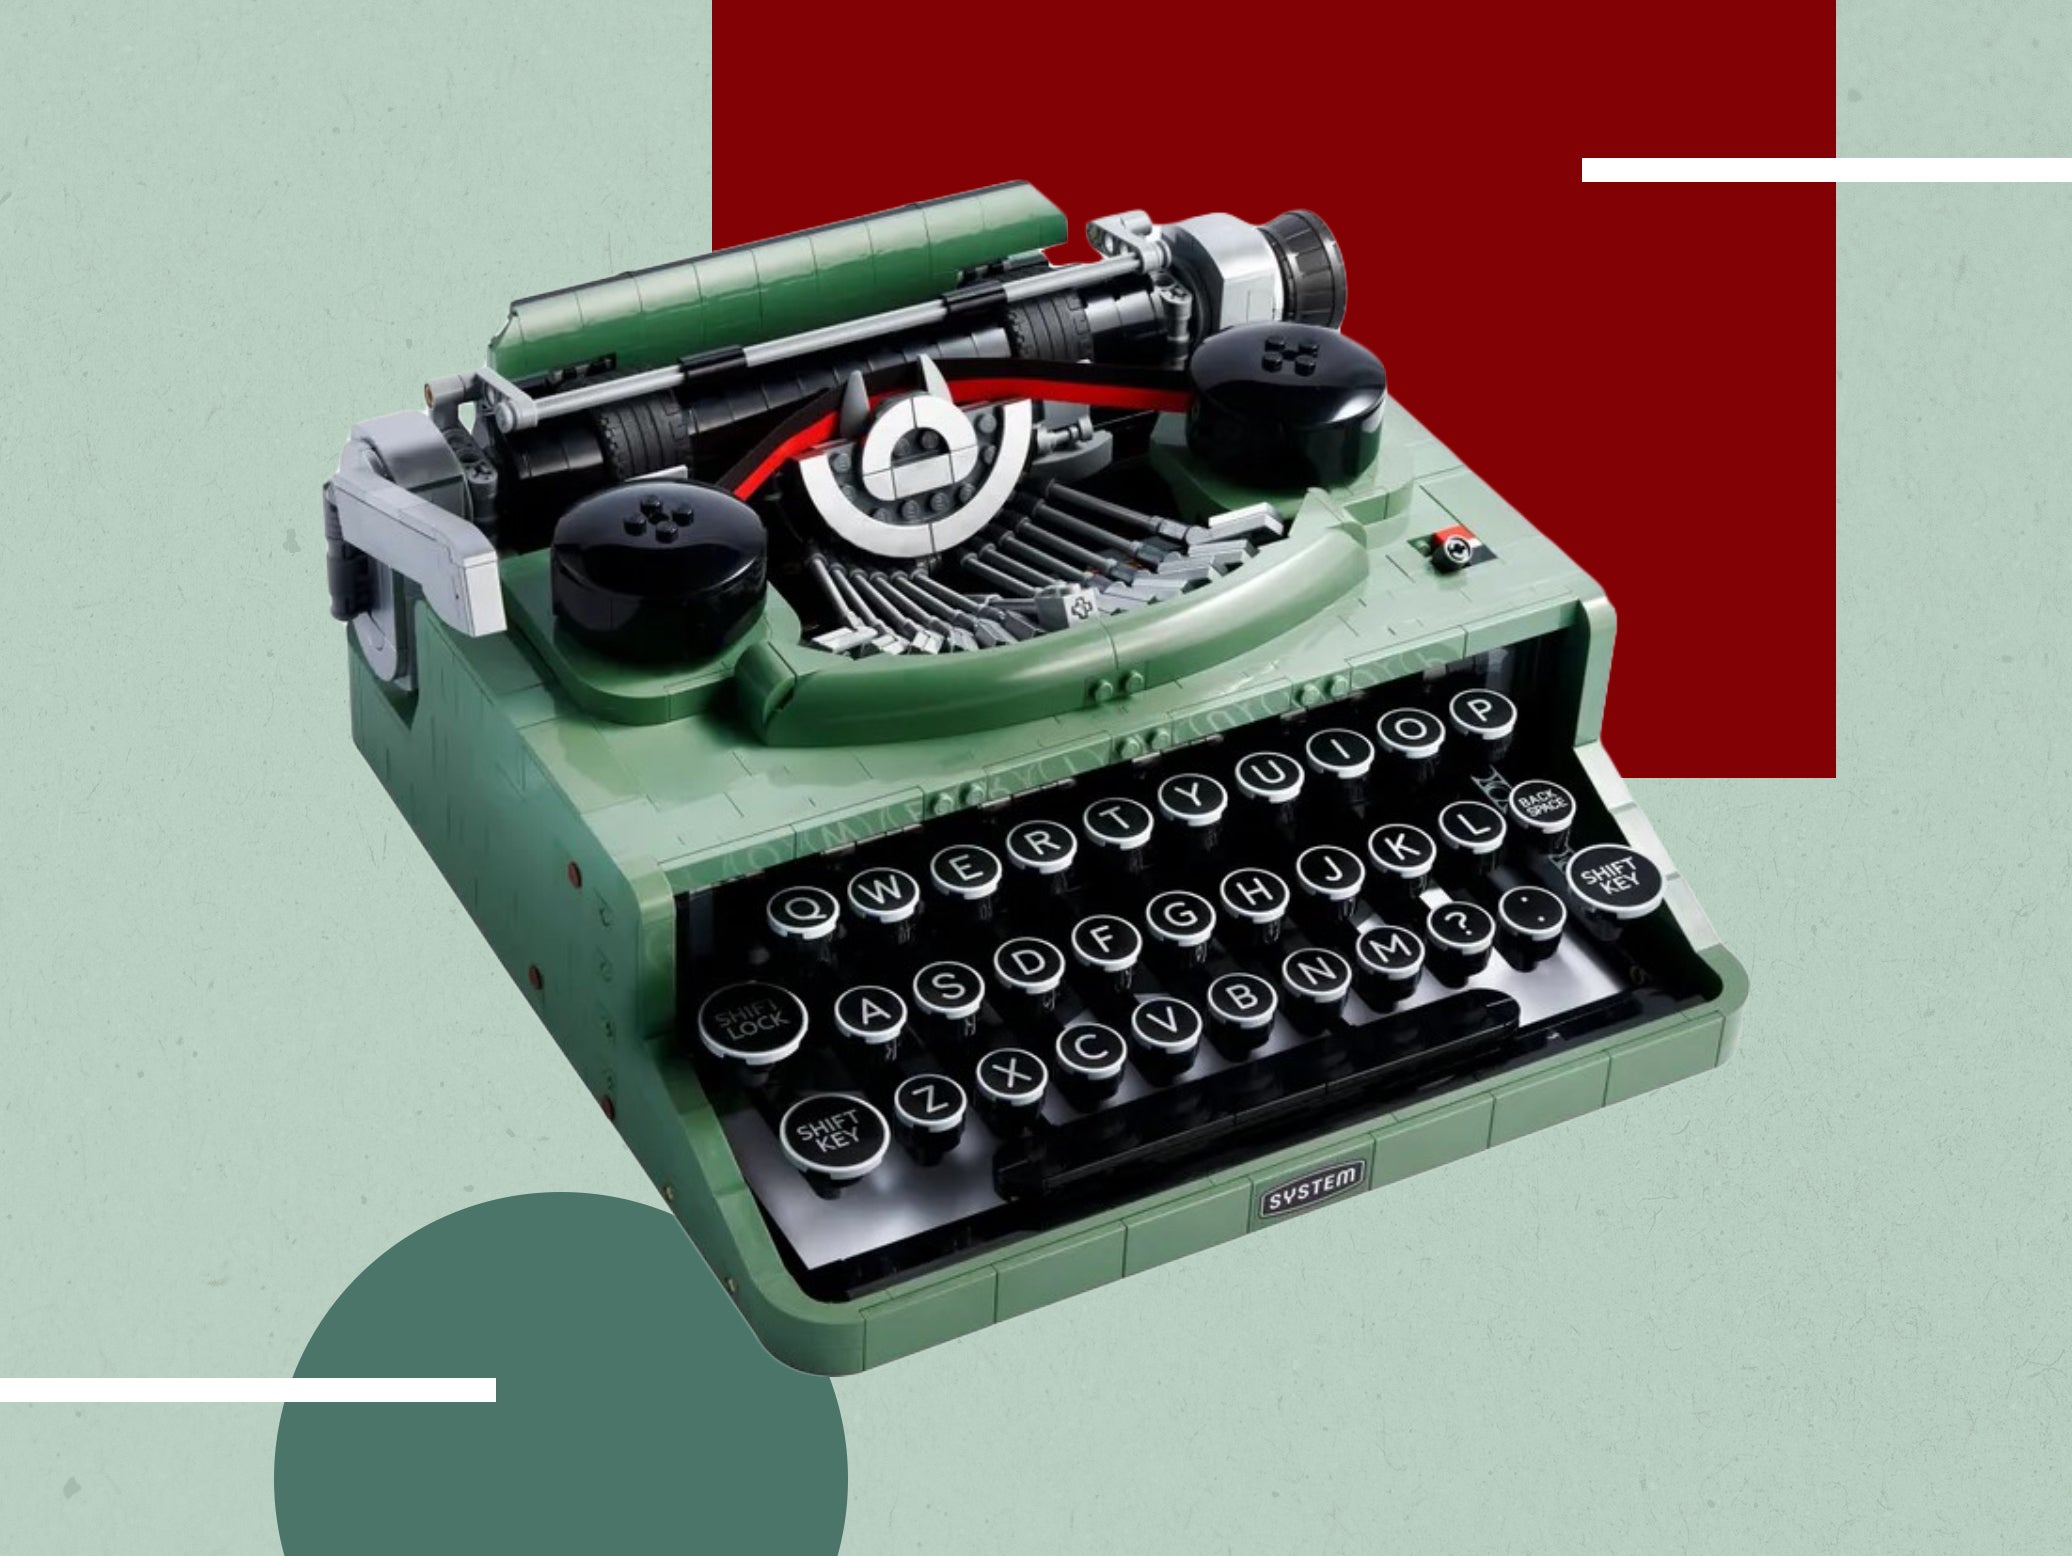 Lego typewriter: How to buy the 21327 model in the UK | The 